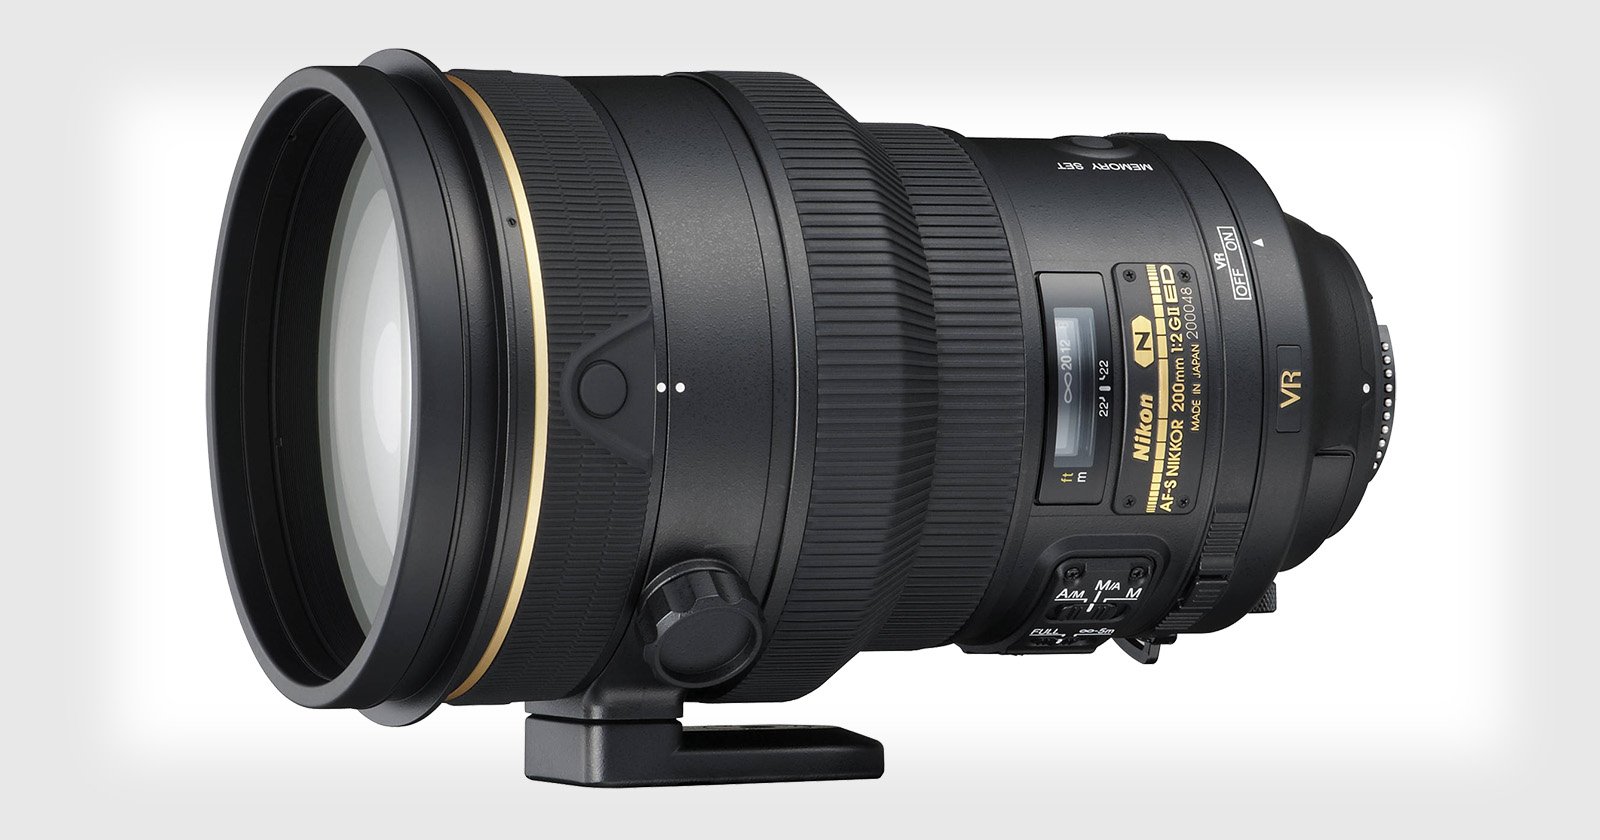 Nikons Exceptional 200mm f/2G Lens Has Been Discontinued